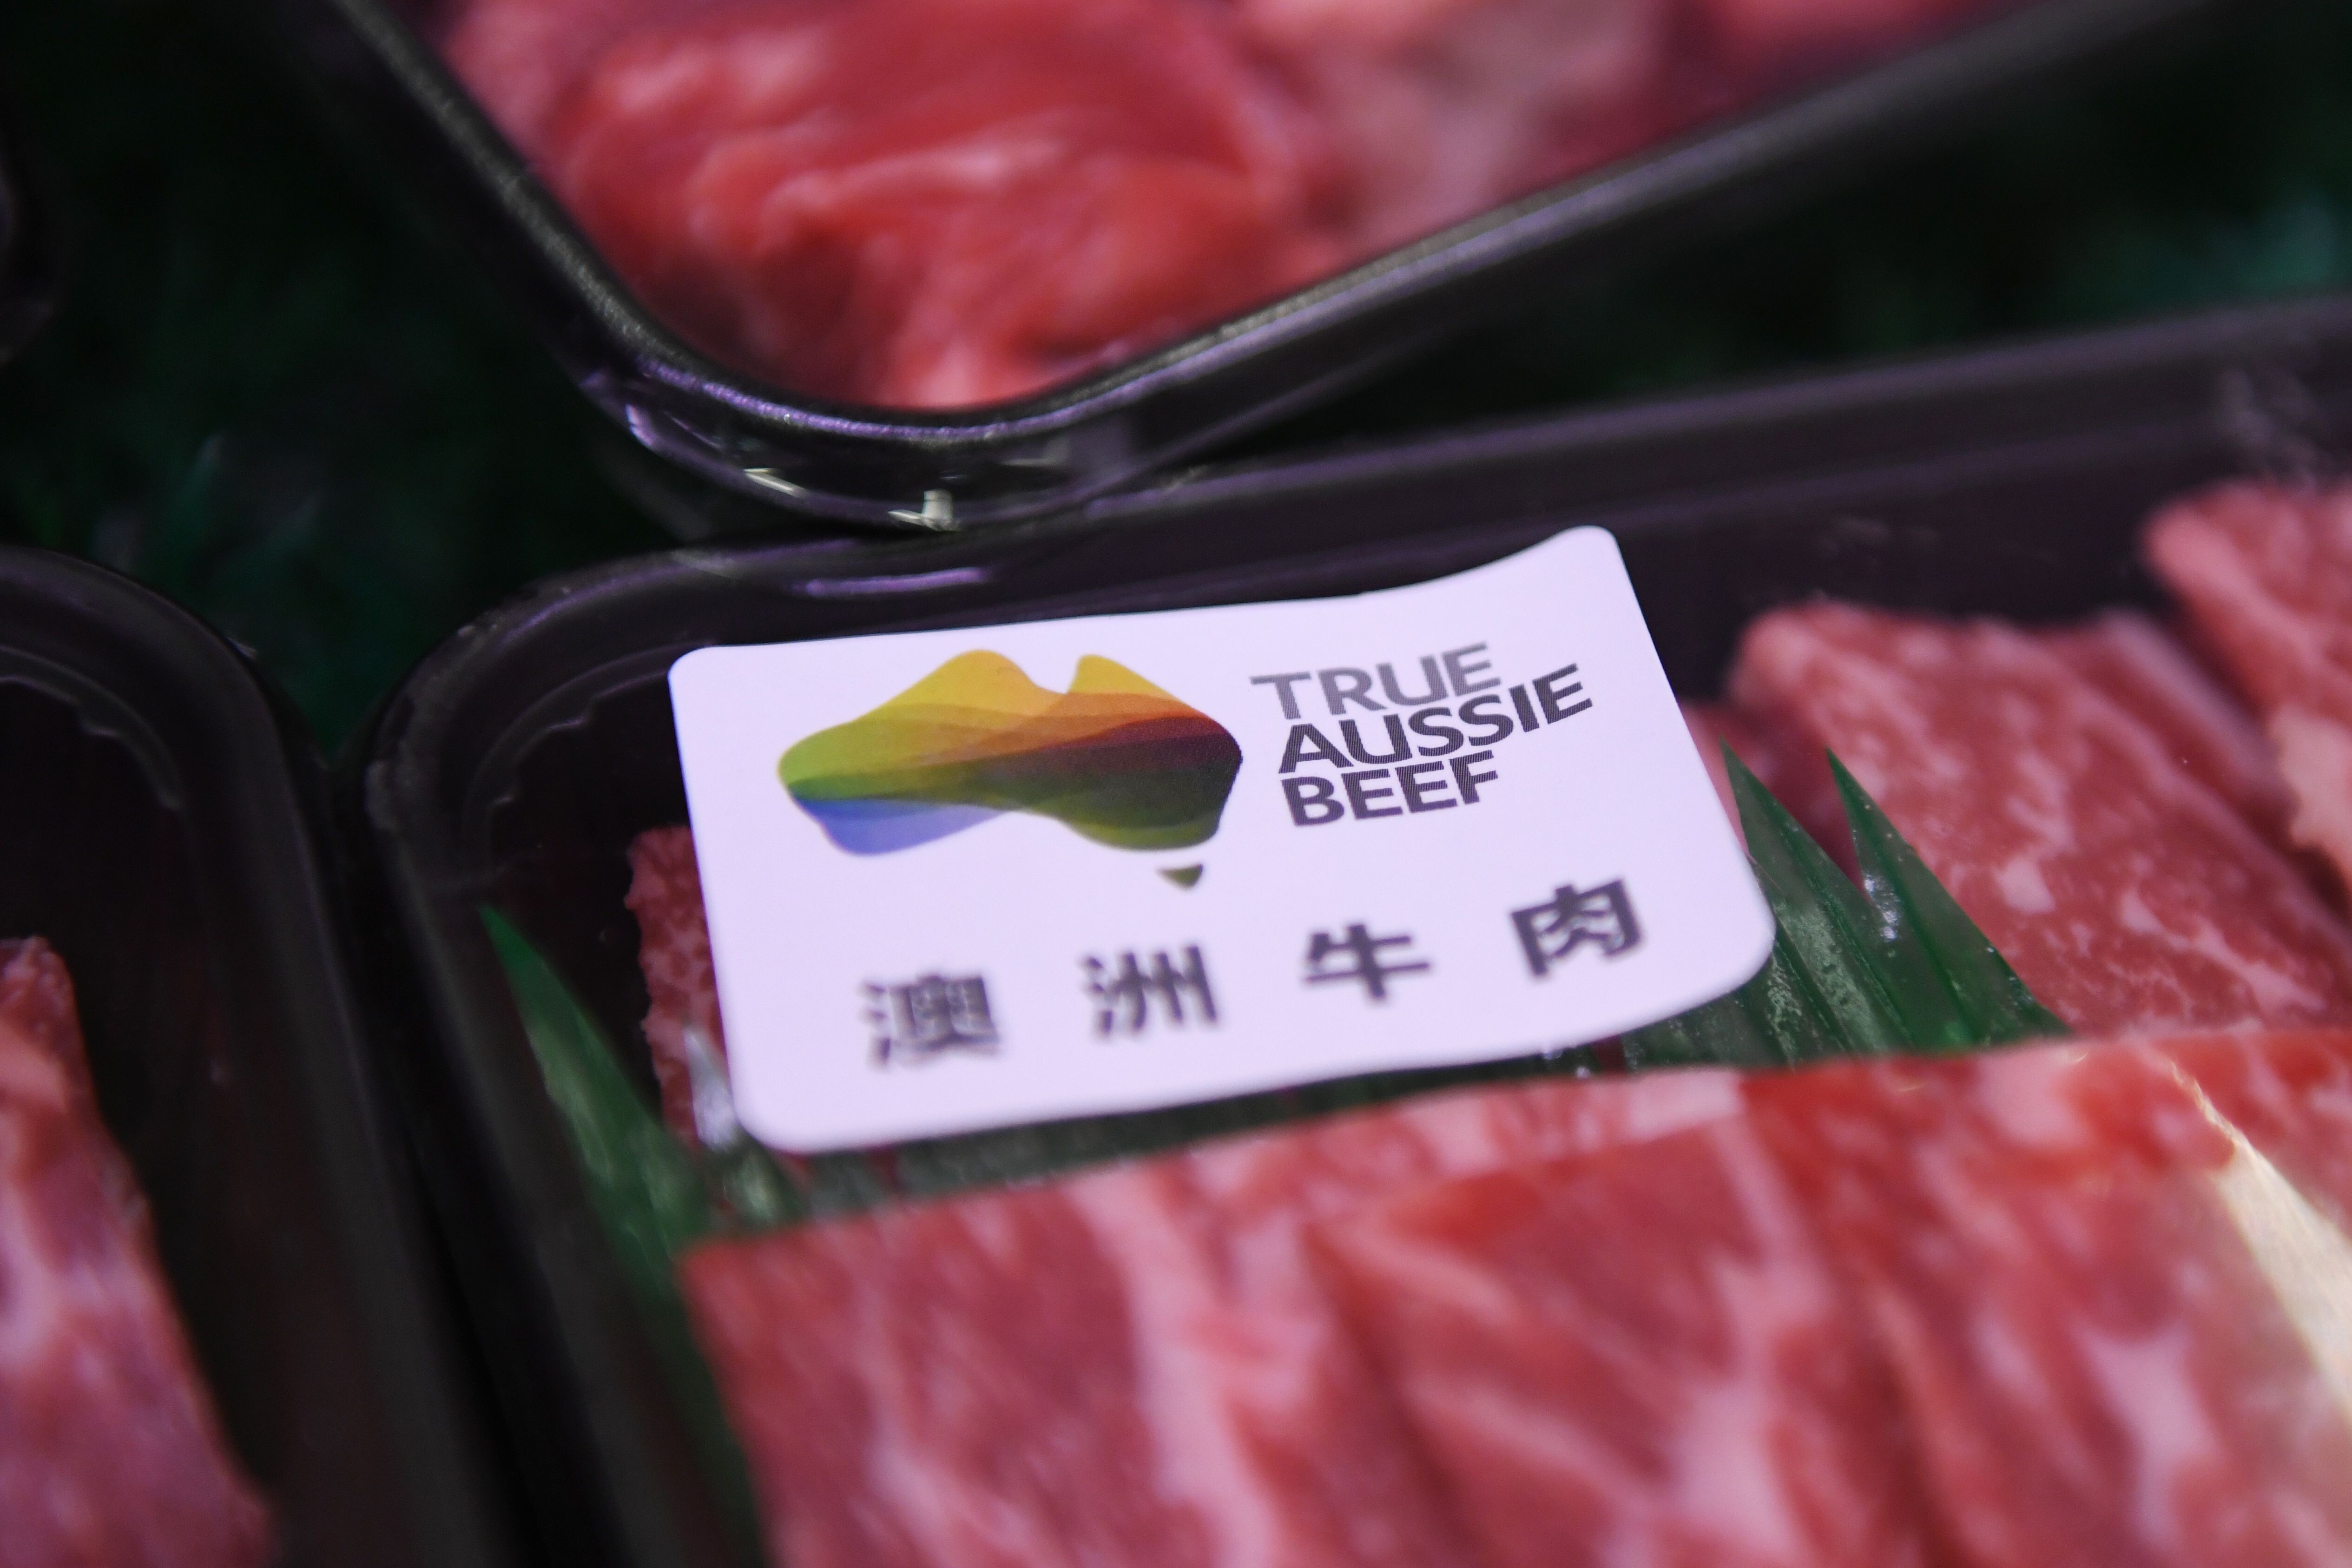 Australian agricultural companies fear they may have to shed jobs as its trade relationship with China deteriorates. Photo: AFP